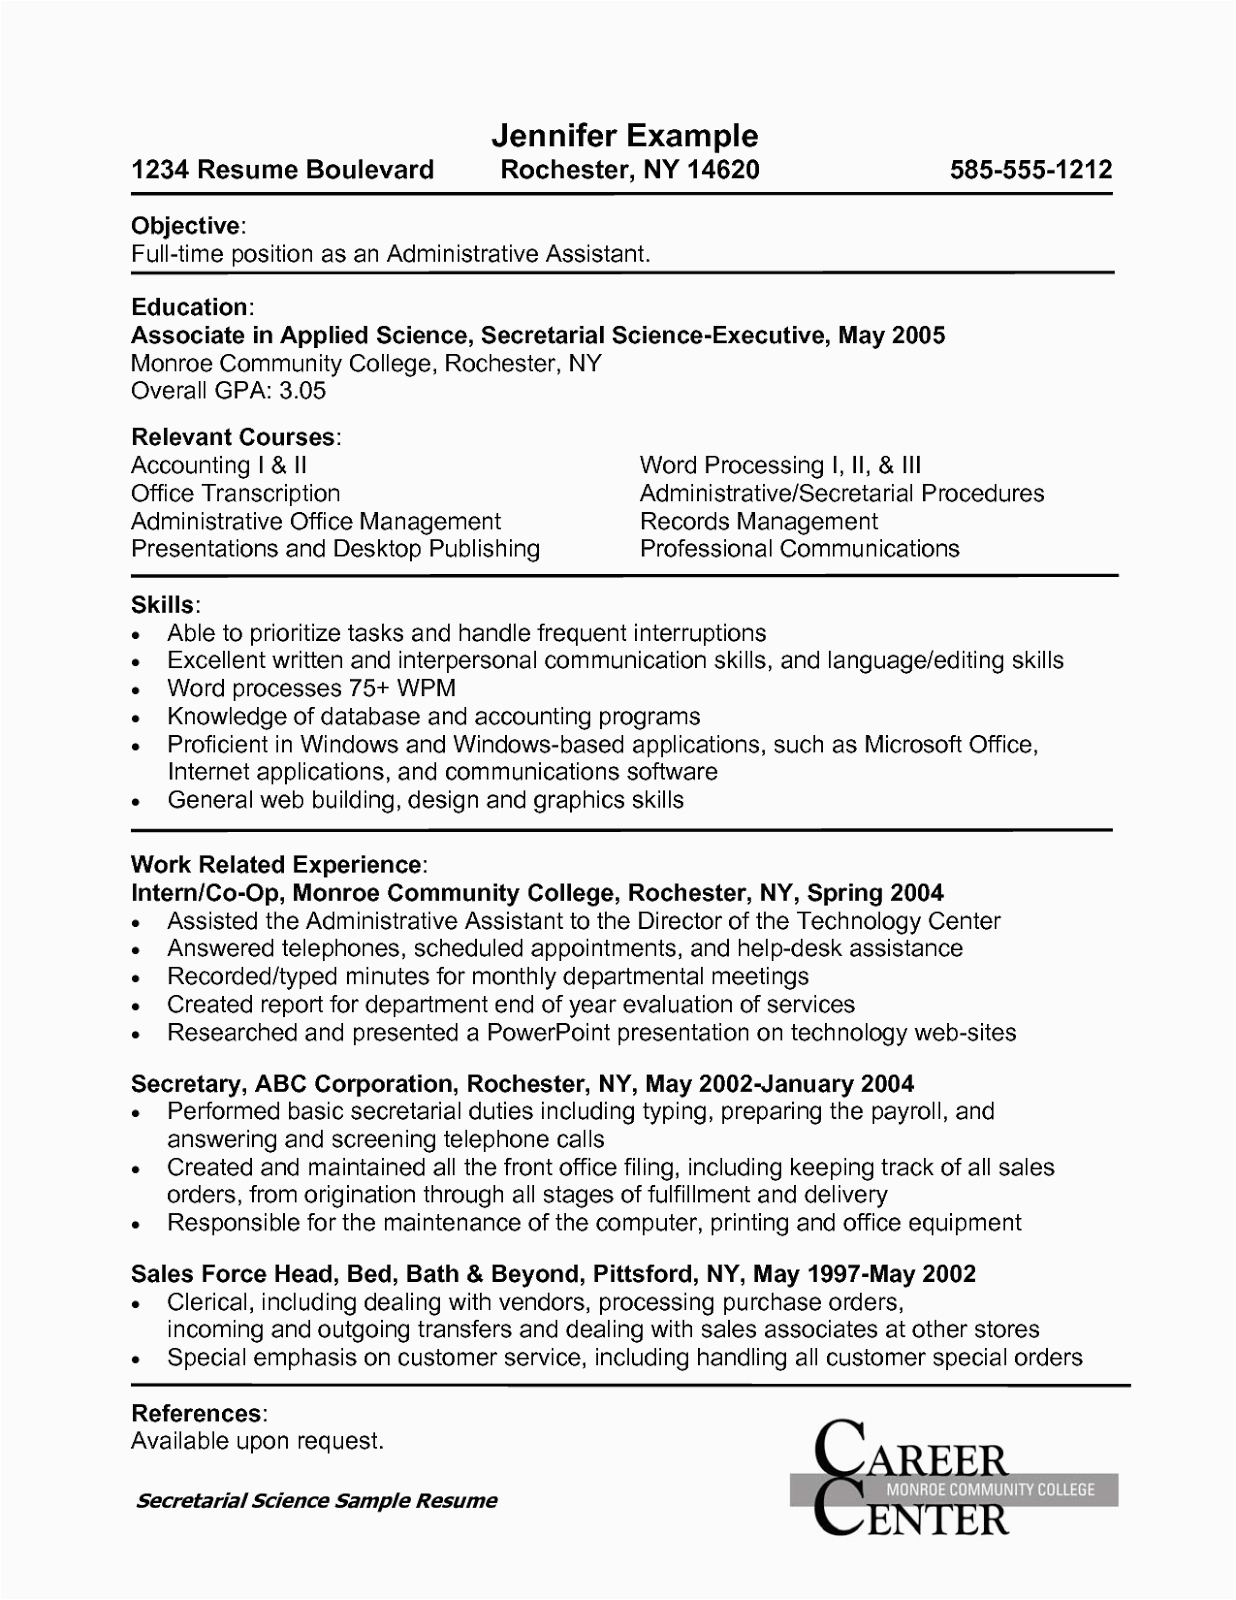 Administrative assistant Resume Objective Statement Samples Resume Administrative assistant Objective Examples Tipss Und Vorlagen